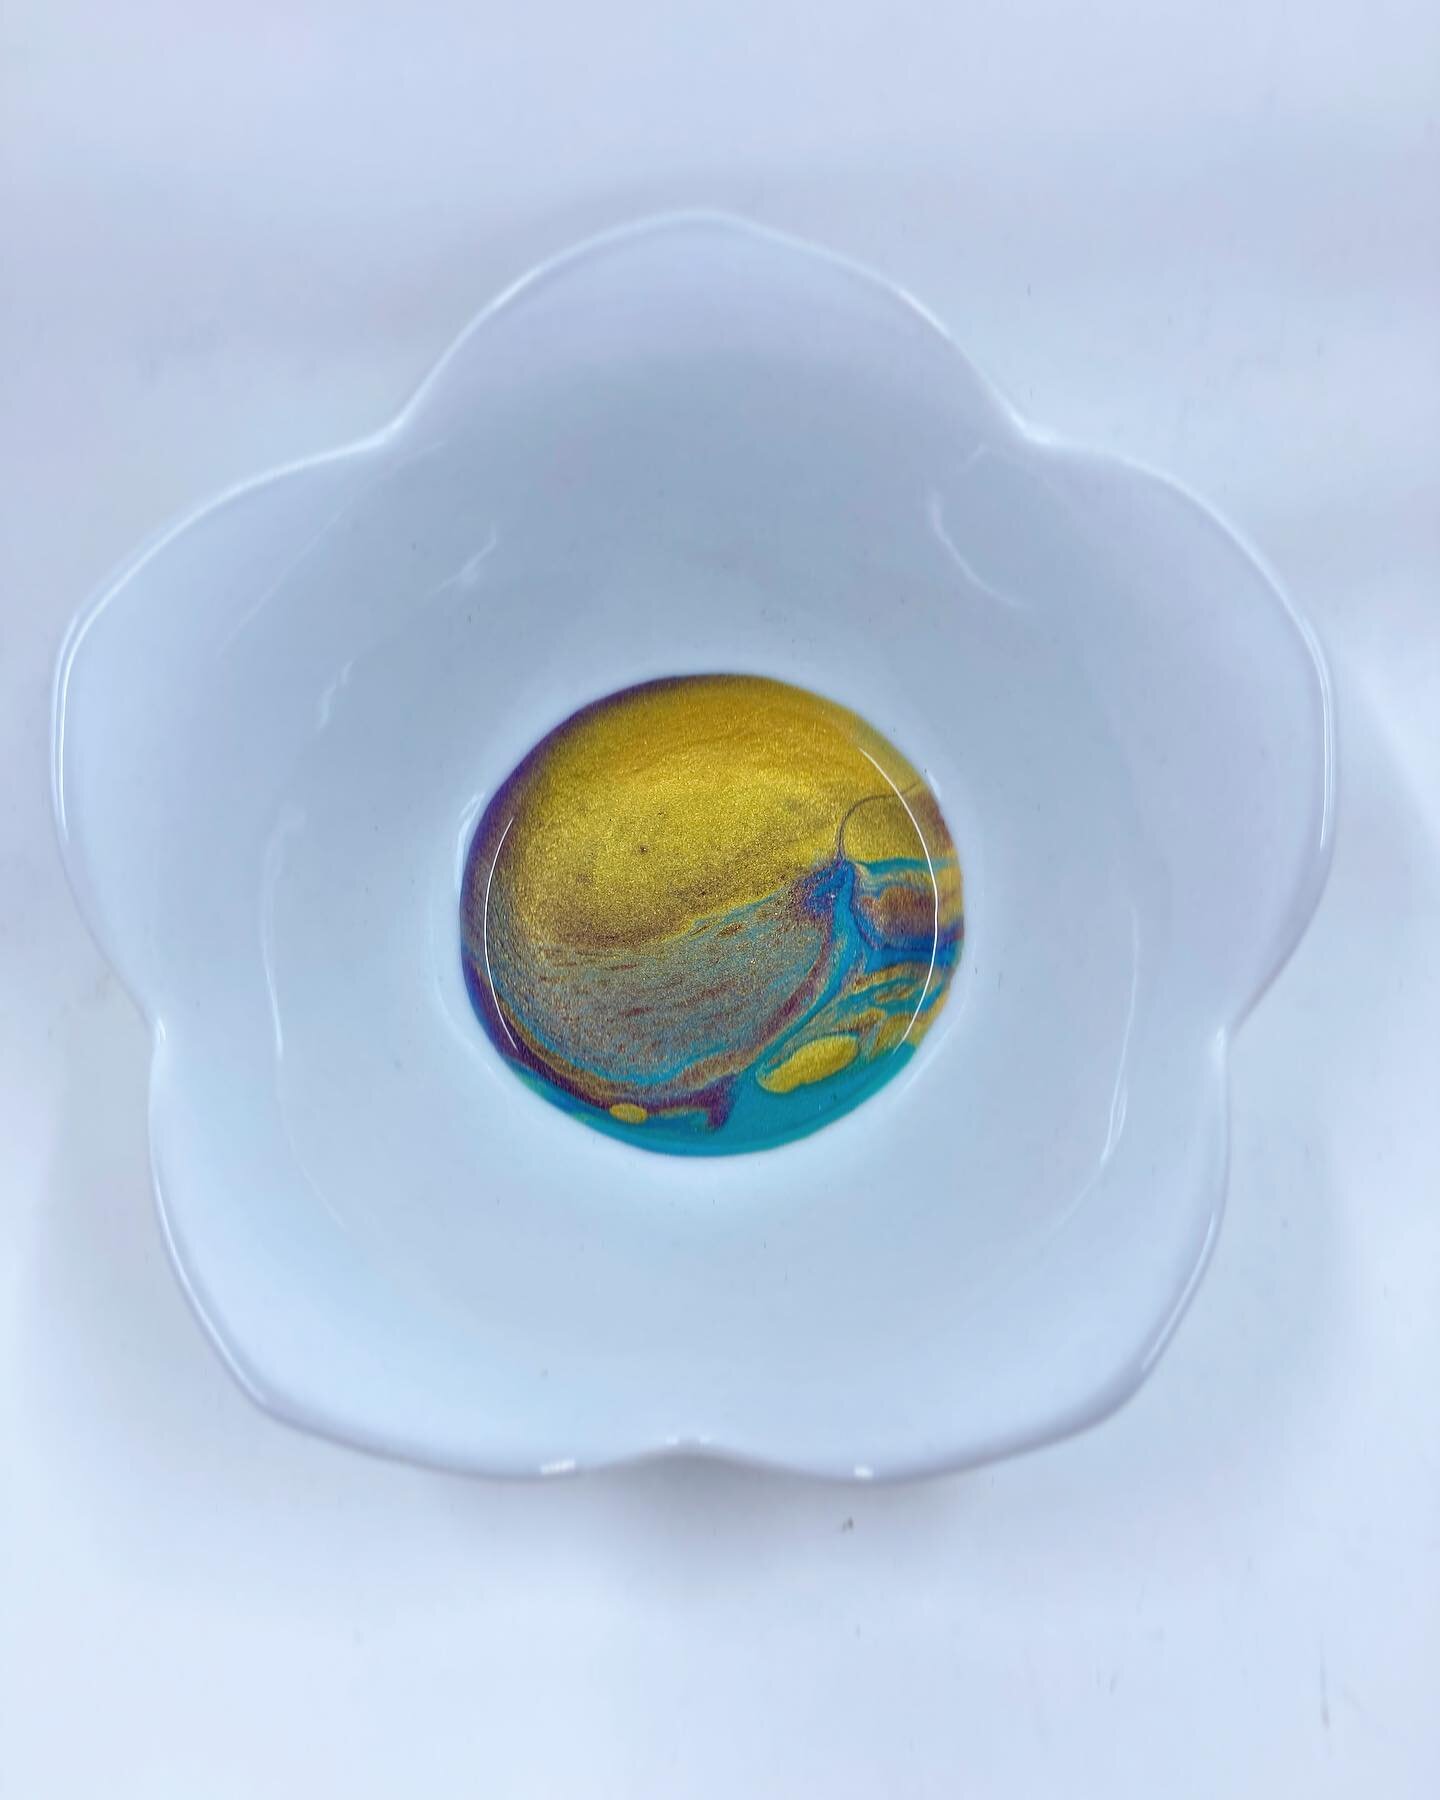 #repurposed ring dish! This lil guy has a clear coat of resin over an acrylic paint pour, making it perfect for dropping your rings, earrings, keys, or spare change when you need to.

#acrylicpouring #acrylicpour #fluidart #resin #dish #ringdish #upc